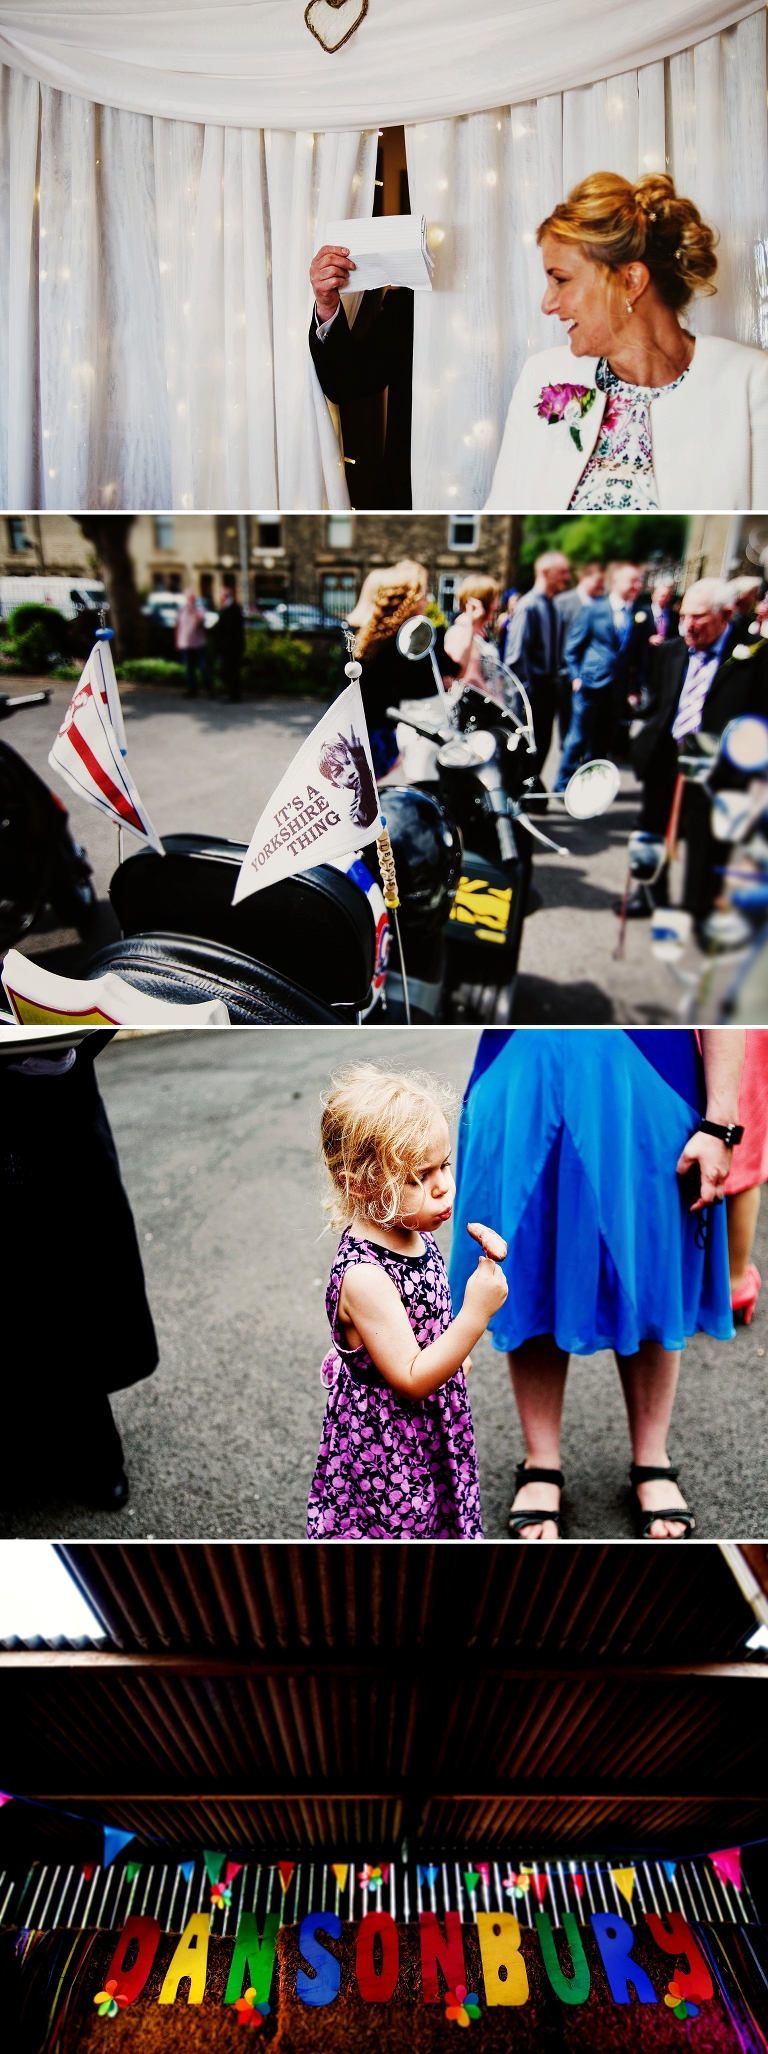 Vespa at a wedding with it's a yorkshire thing flag